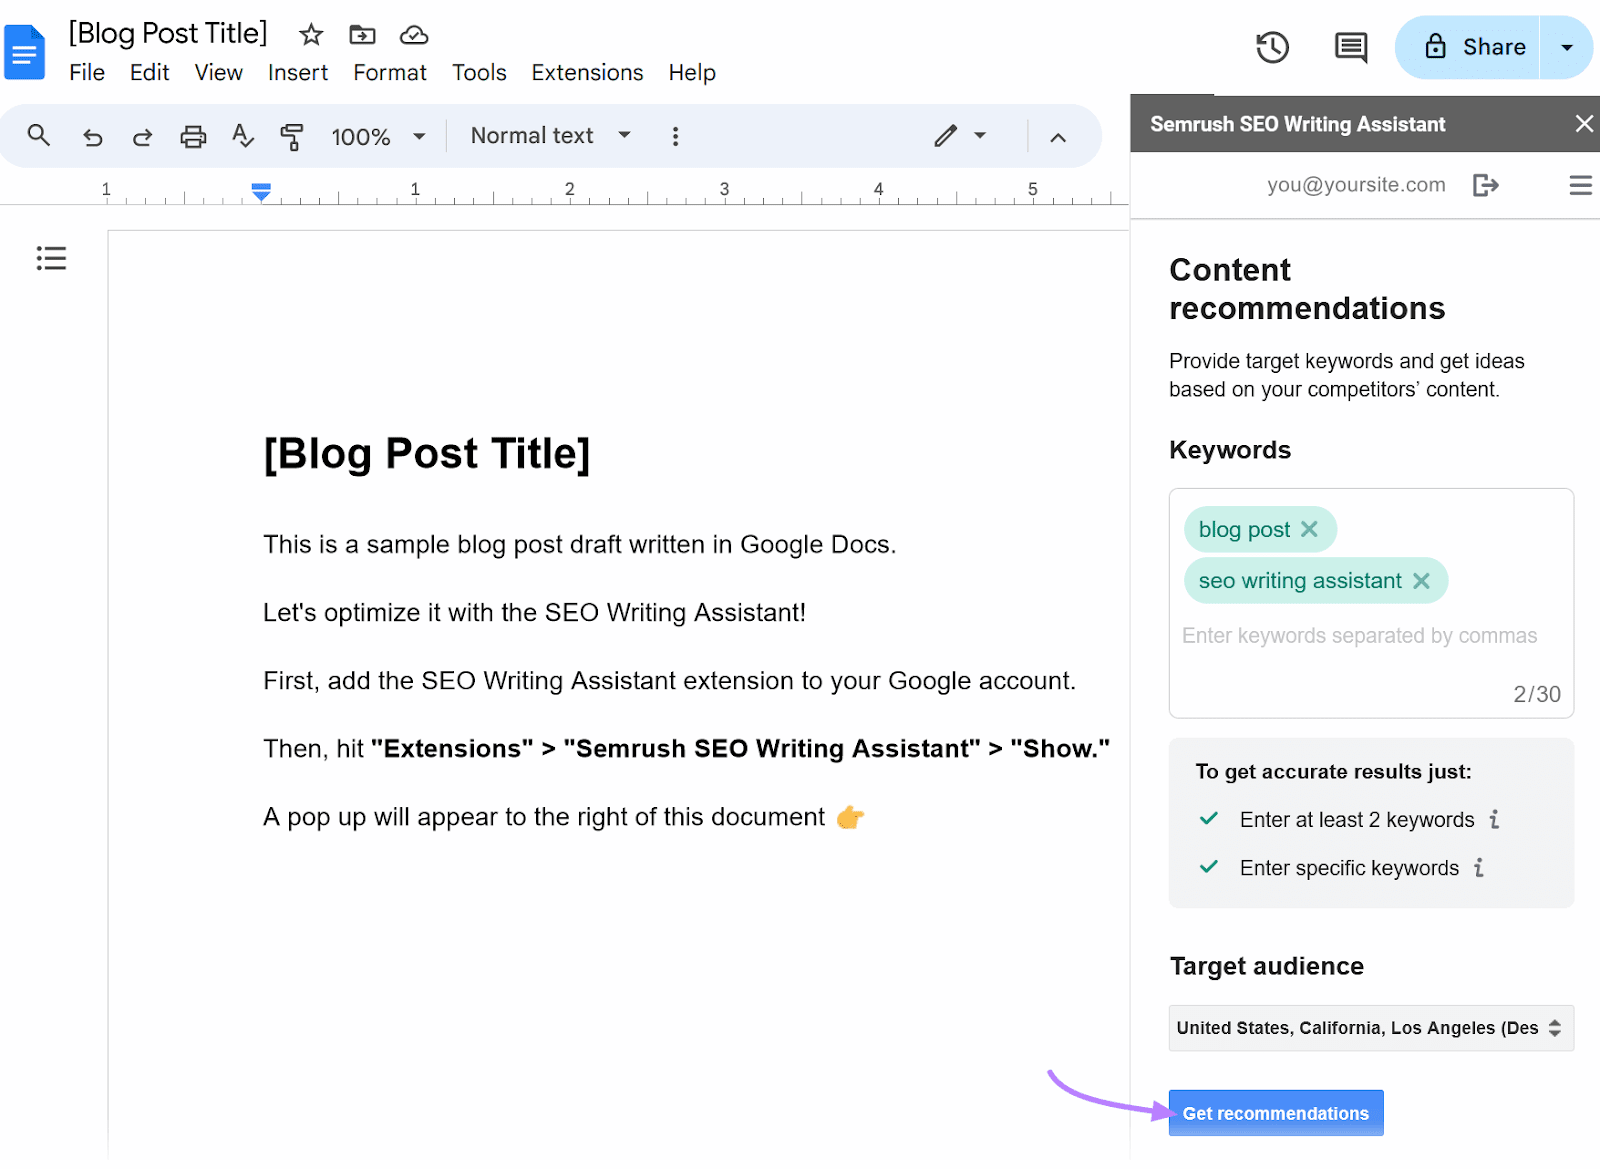 Google Docs interface displaying a draft for a blog post, along with a Semrush SEO Writing Assistant sidebar.